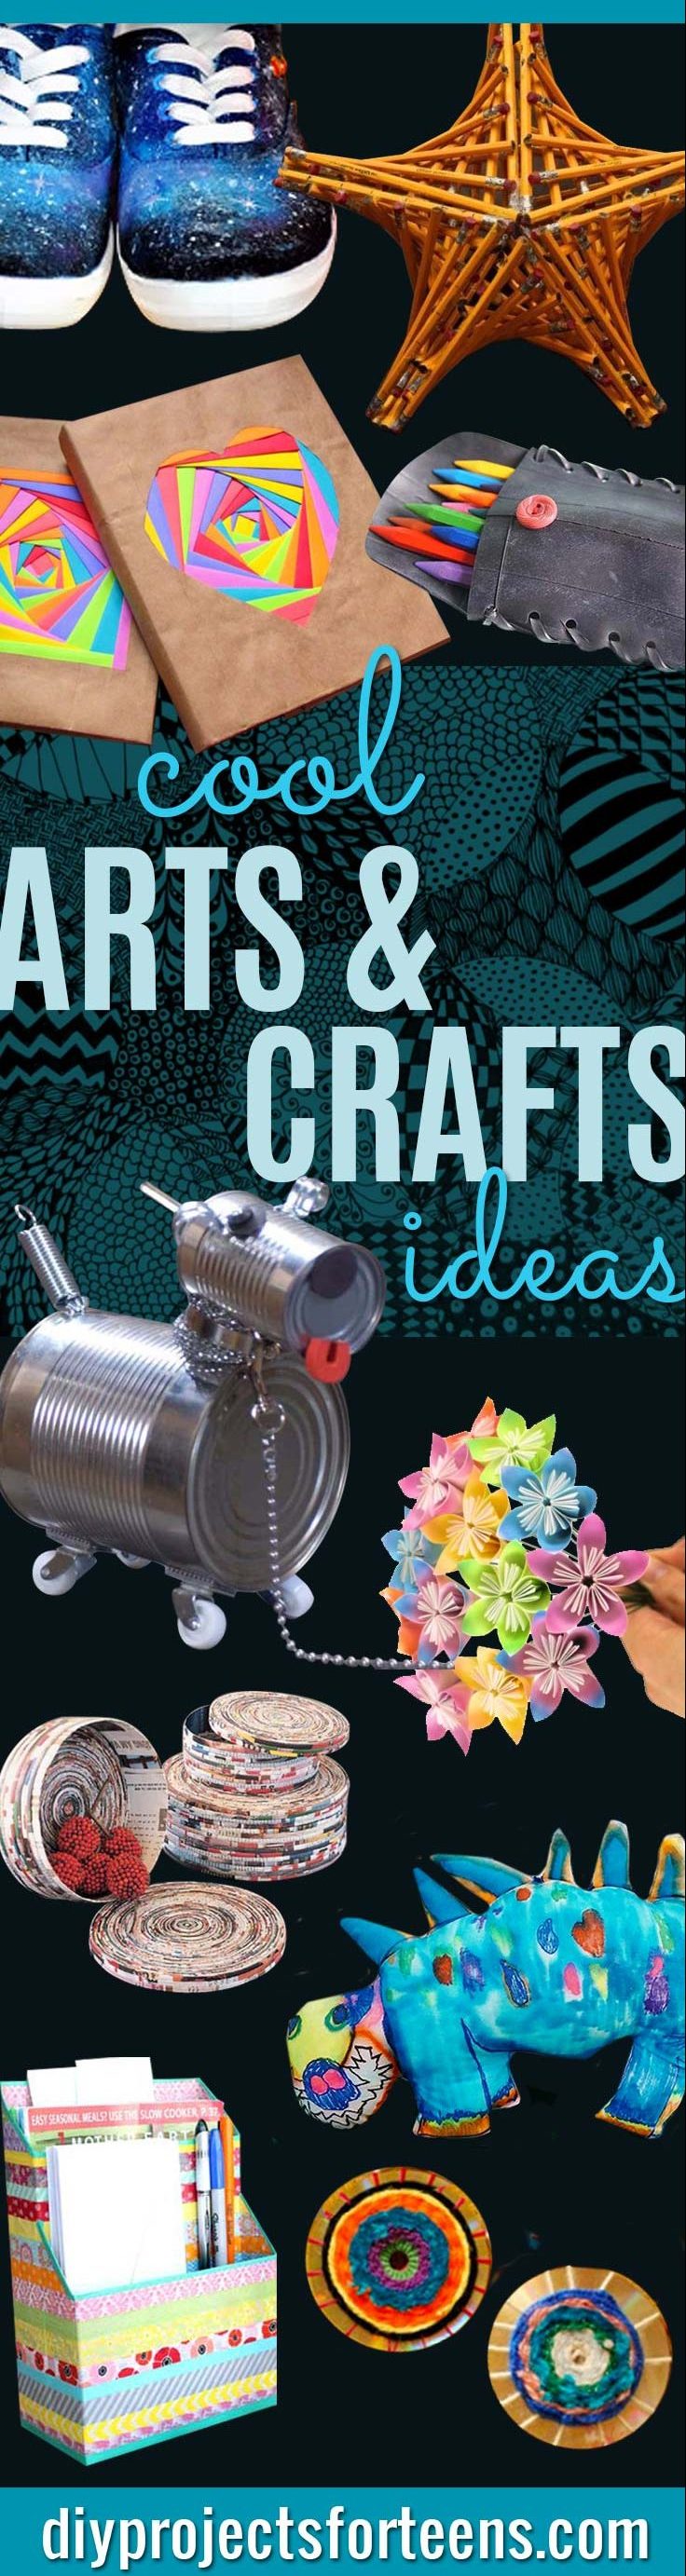 28 Cool Arts and Crafts Ideas for Teens